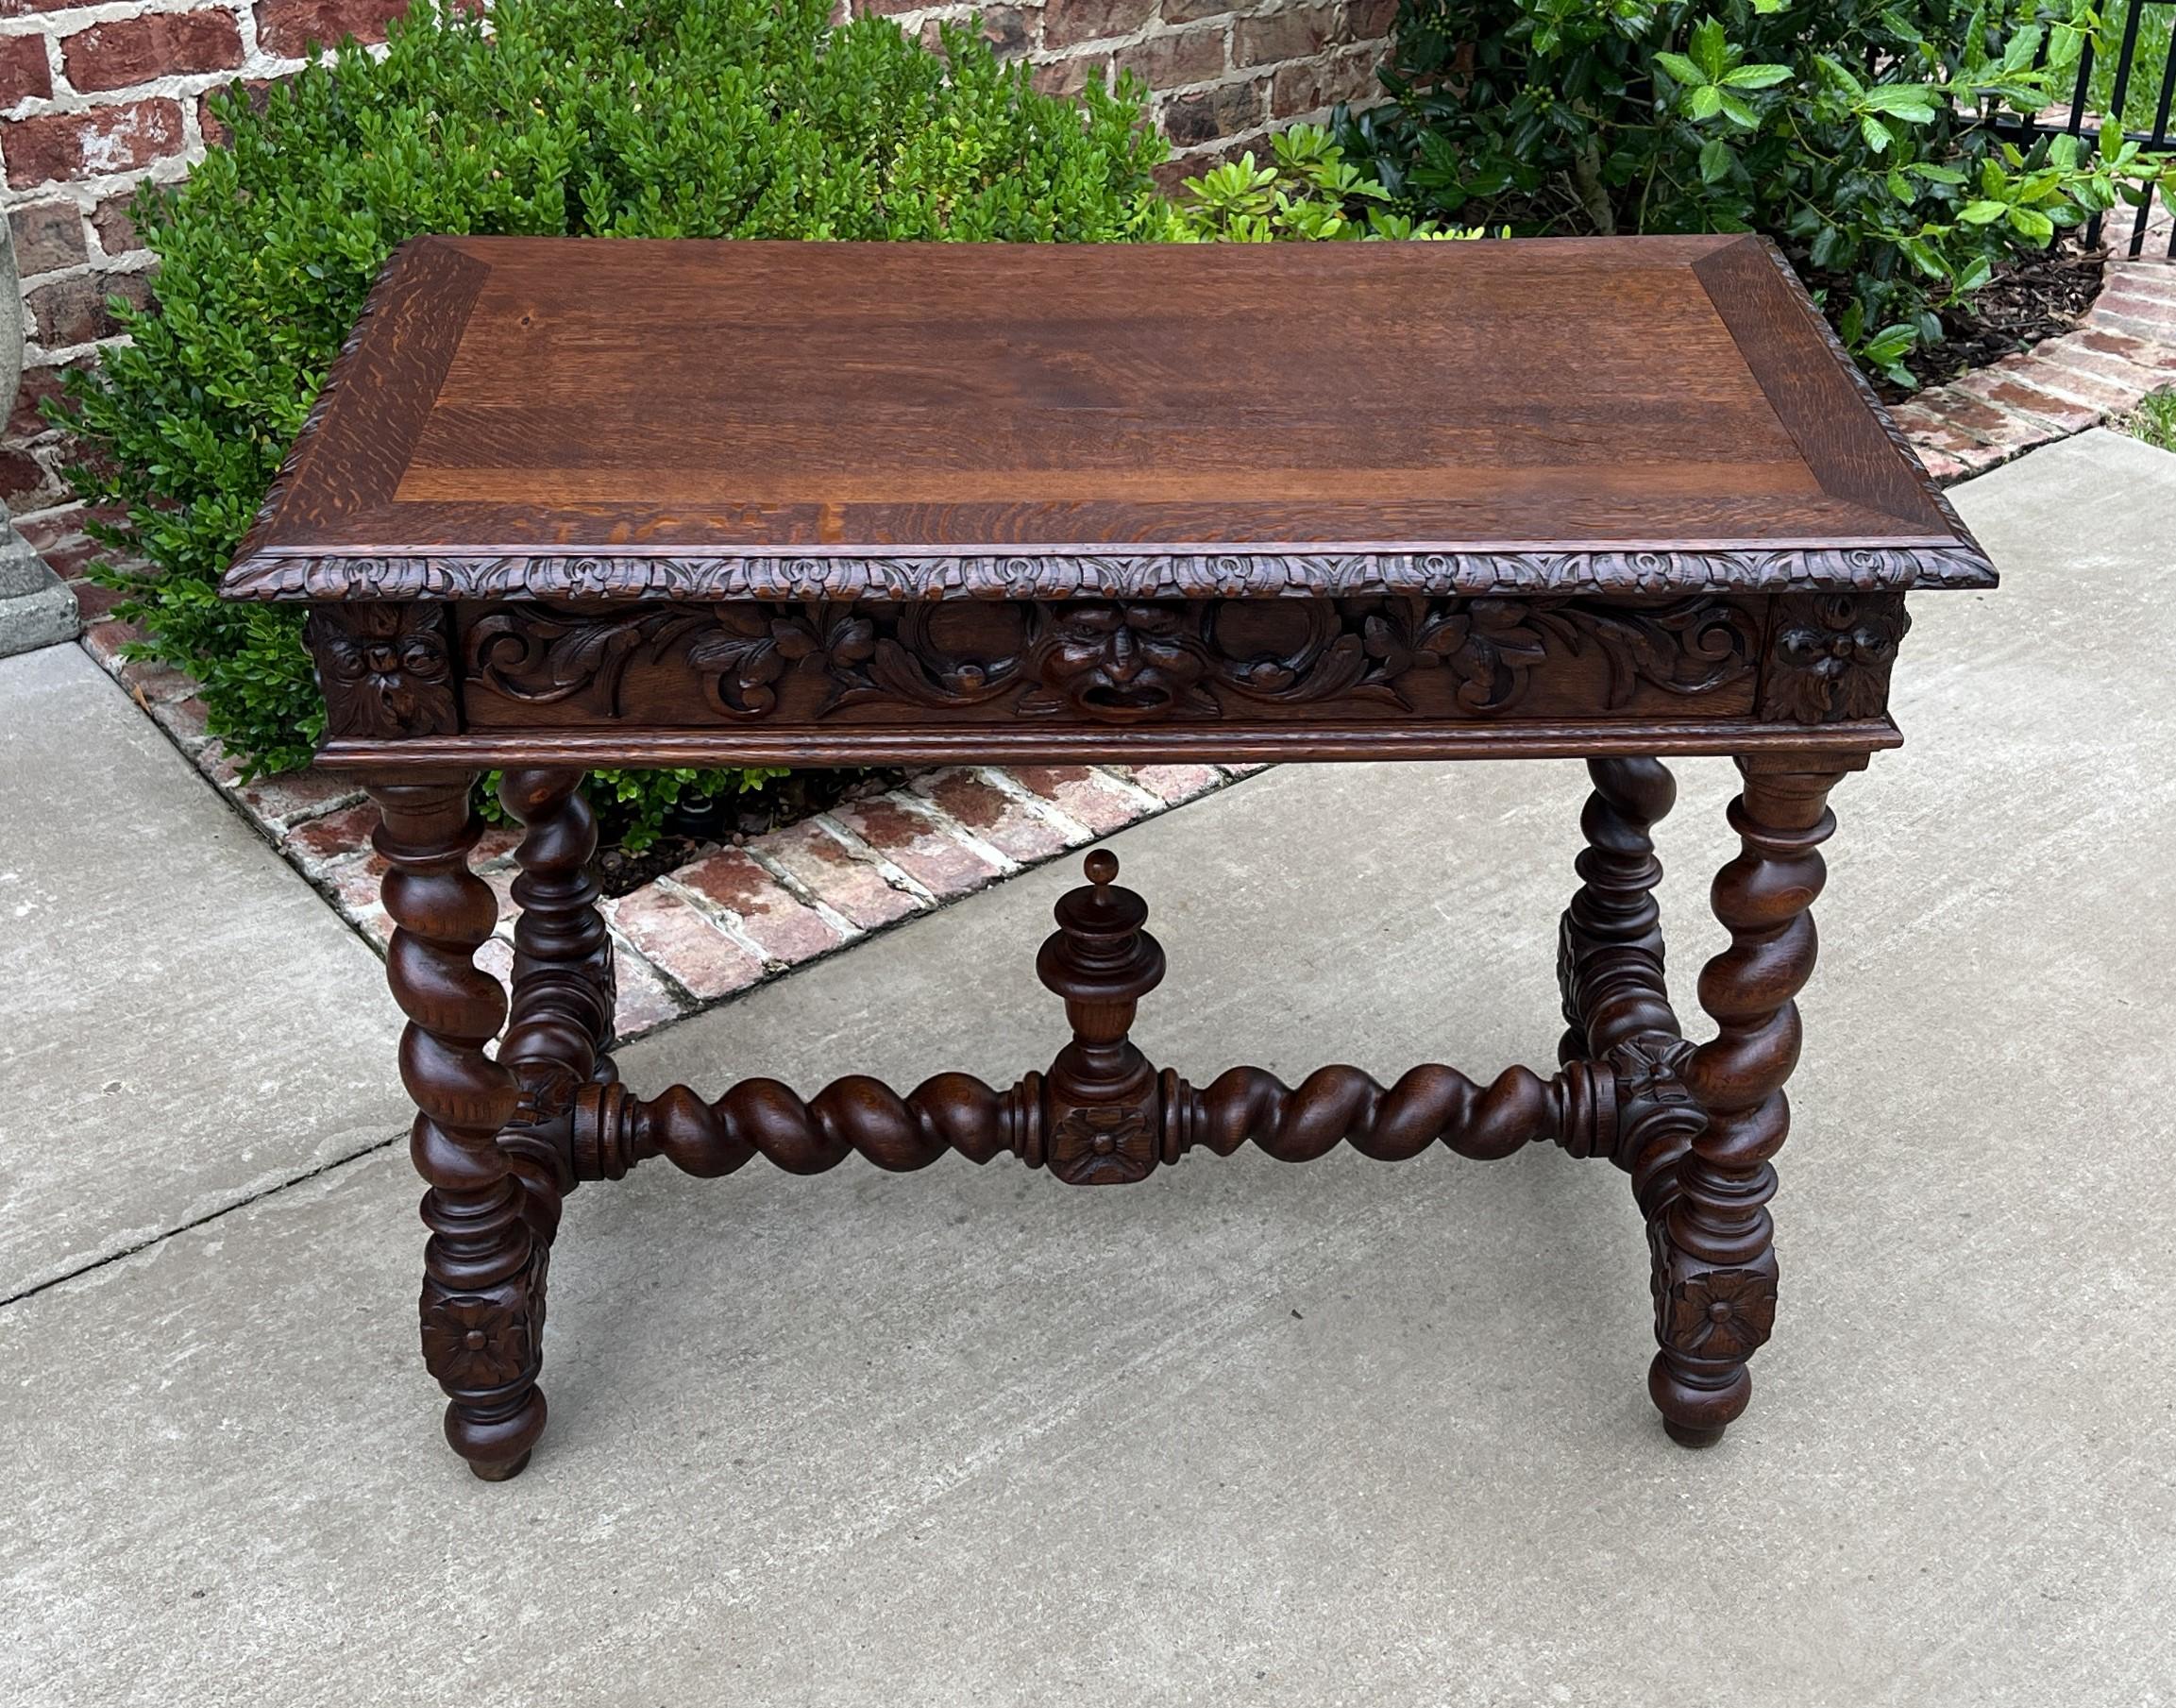 GORGEOUS 19th century Antique French Oak Renaissance Revival Desk or Writing Table with Wide Drawer, 3